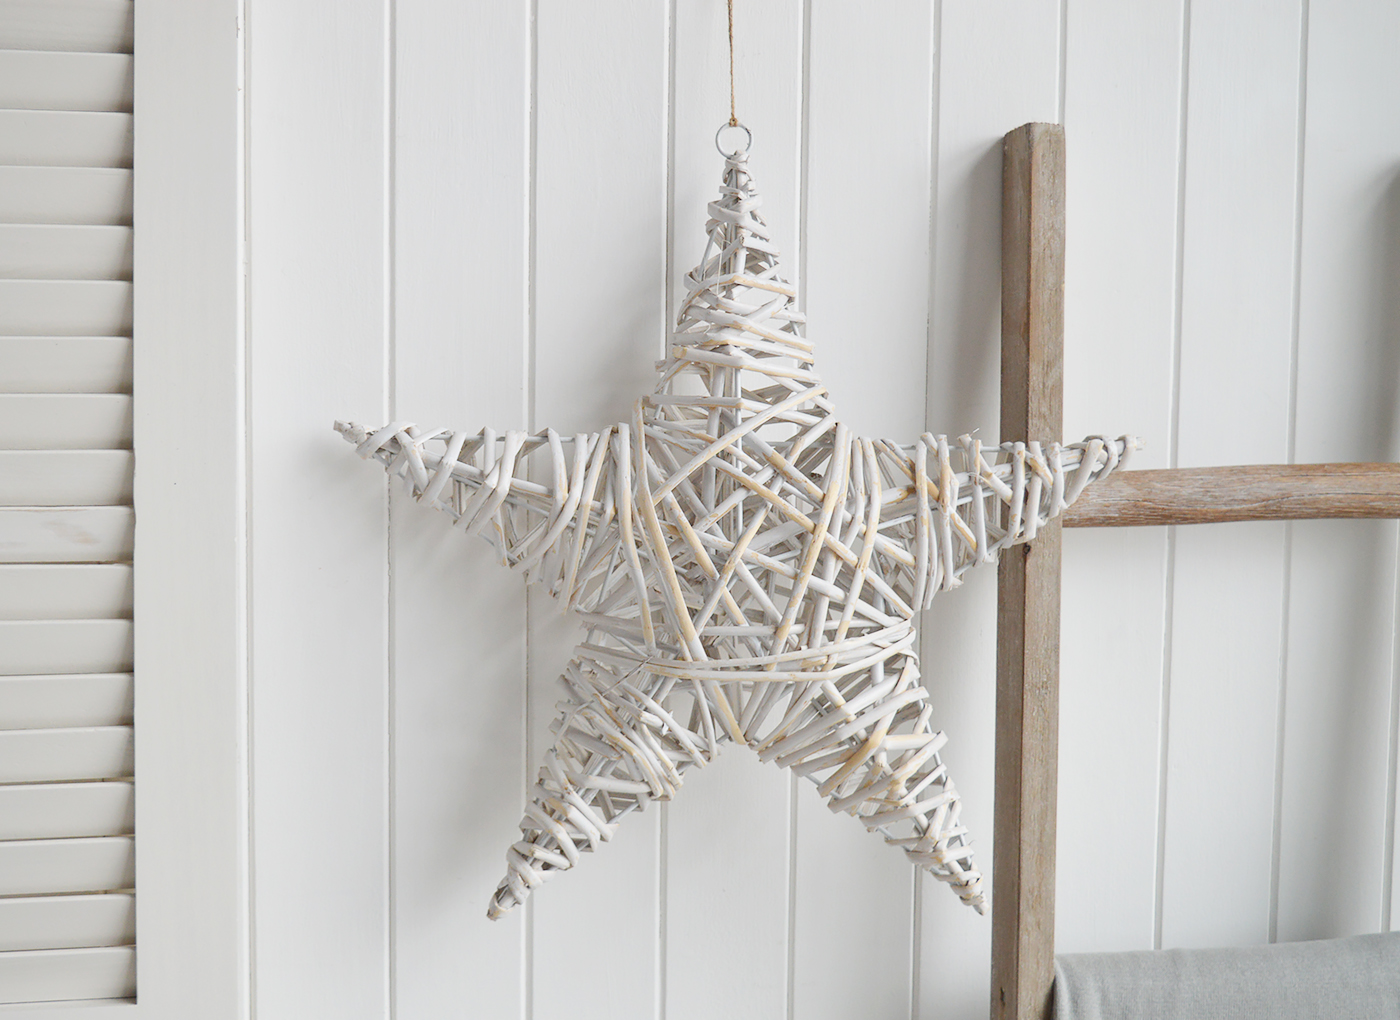 The White Lighthouse. White, New England and Coastal Furniture and accessories for the hallway, living room, bedroom and bathroom. A chunky grey hanging star for coastal, country and farmhouse home decor and interiors